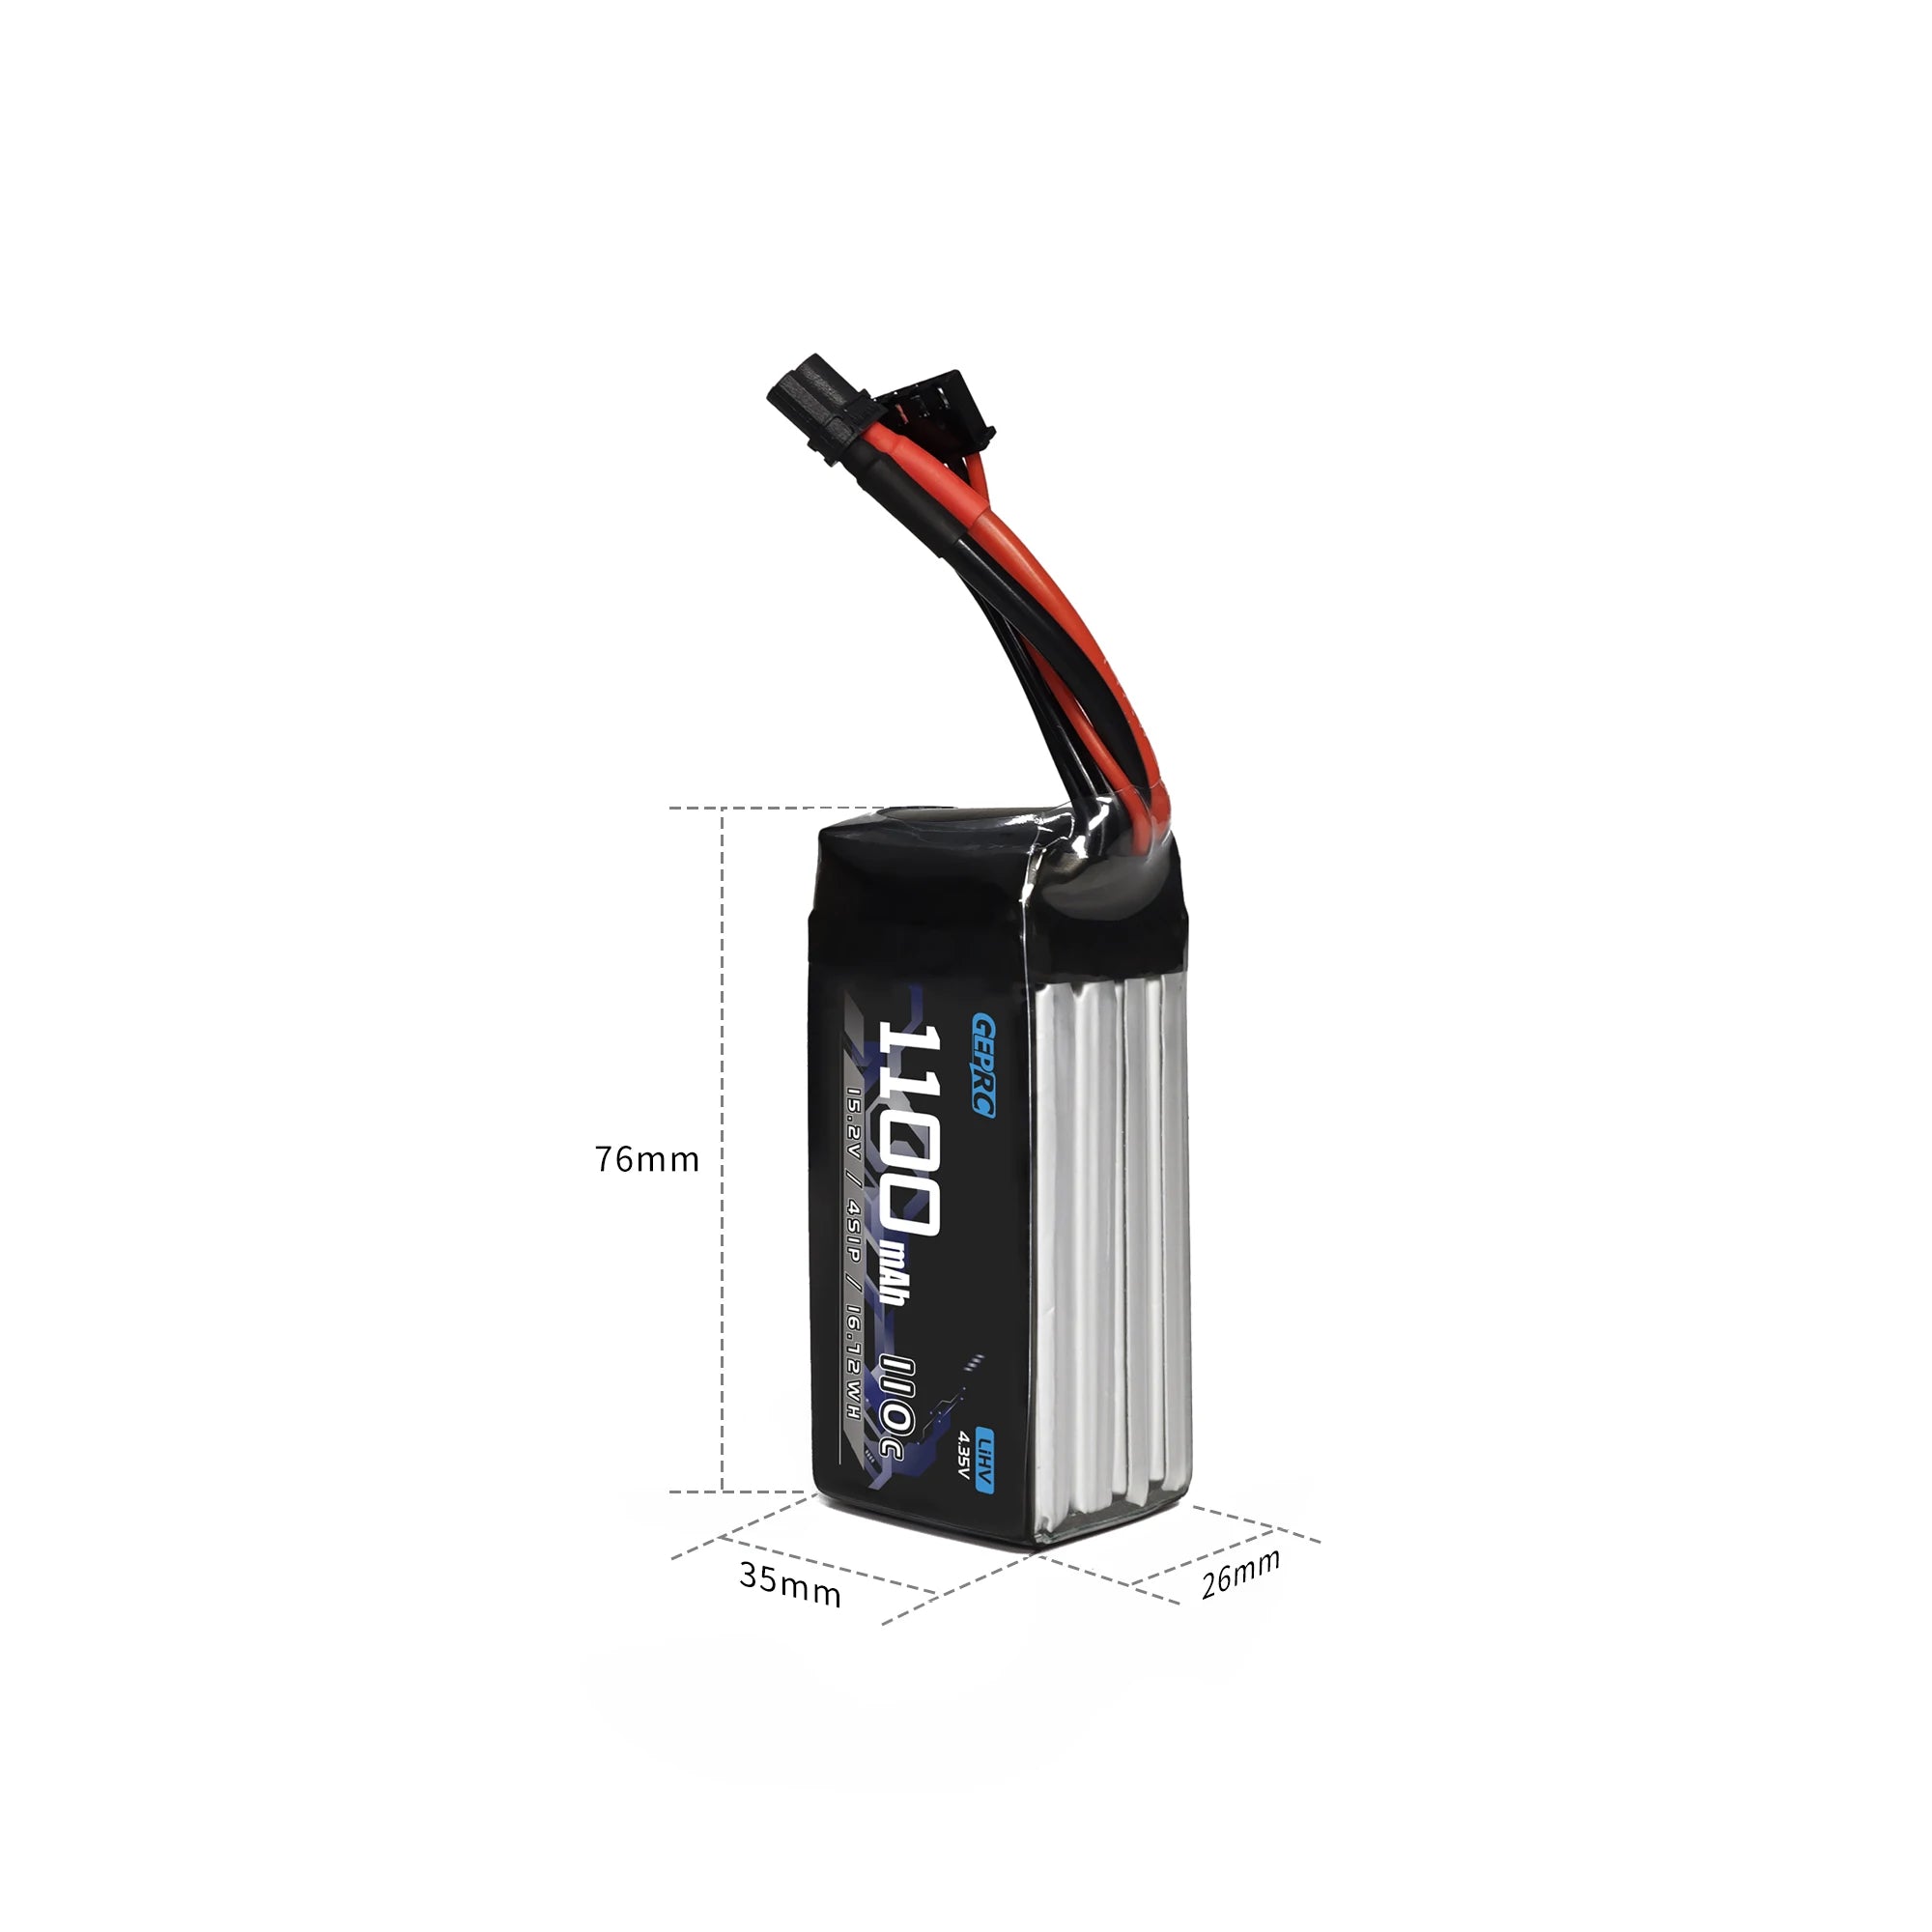 GEPRC 4S 1100mAh 110C LiPo Battery, it is forbidden to reverse the positive and negative poles of the battery (to avoid short circuit